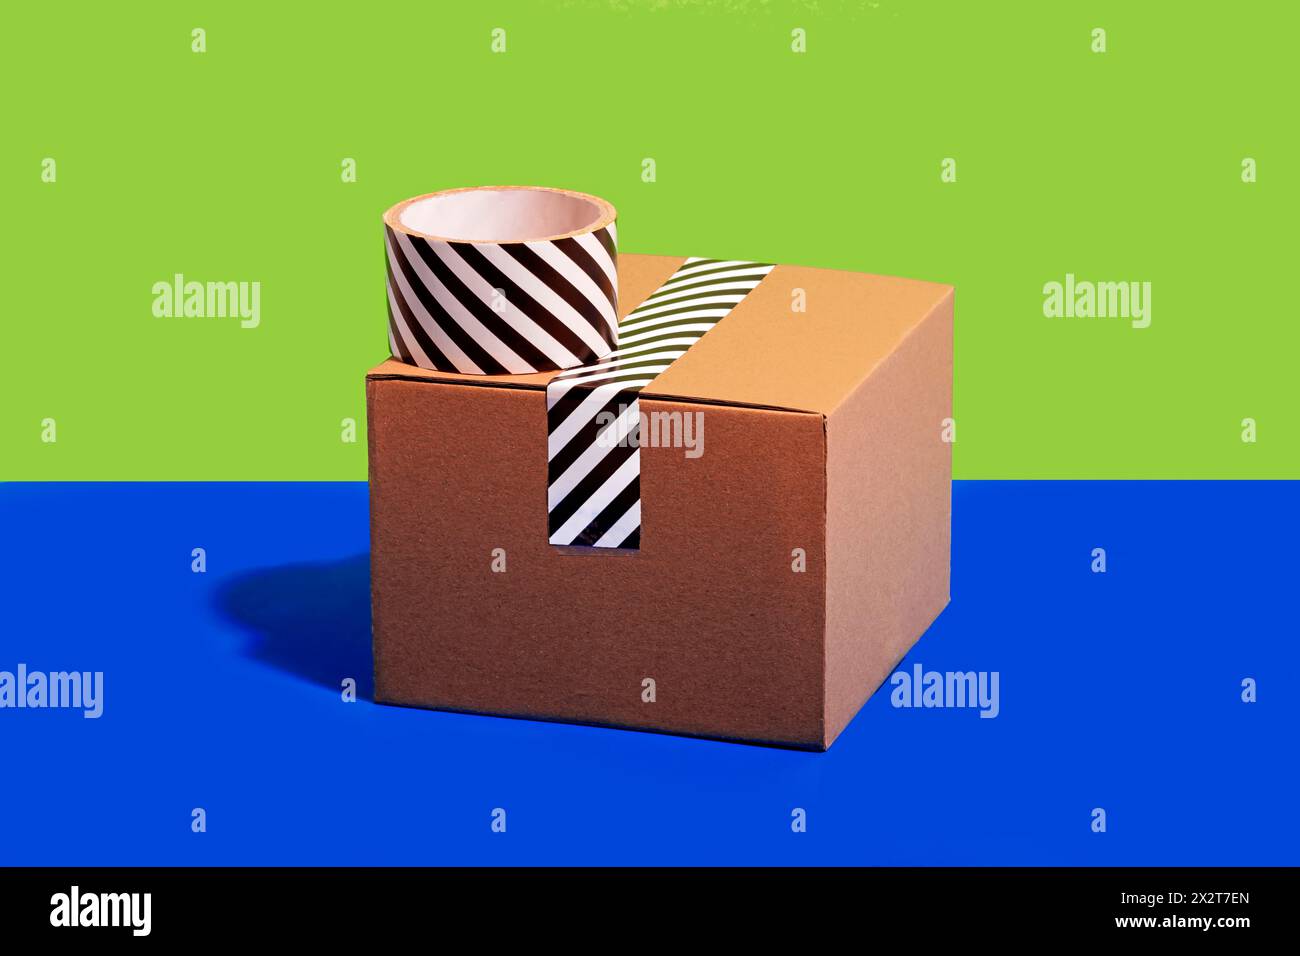 Striped adhesive tape and cardboard box against green and blue background Stock Photo